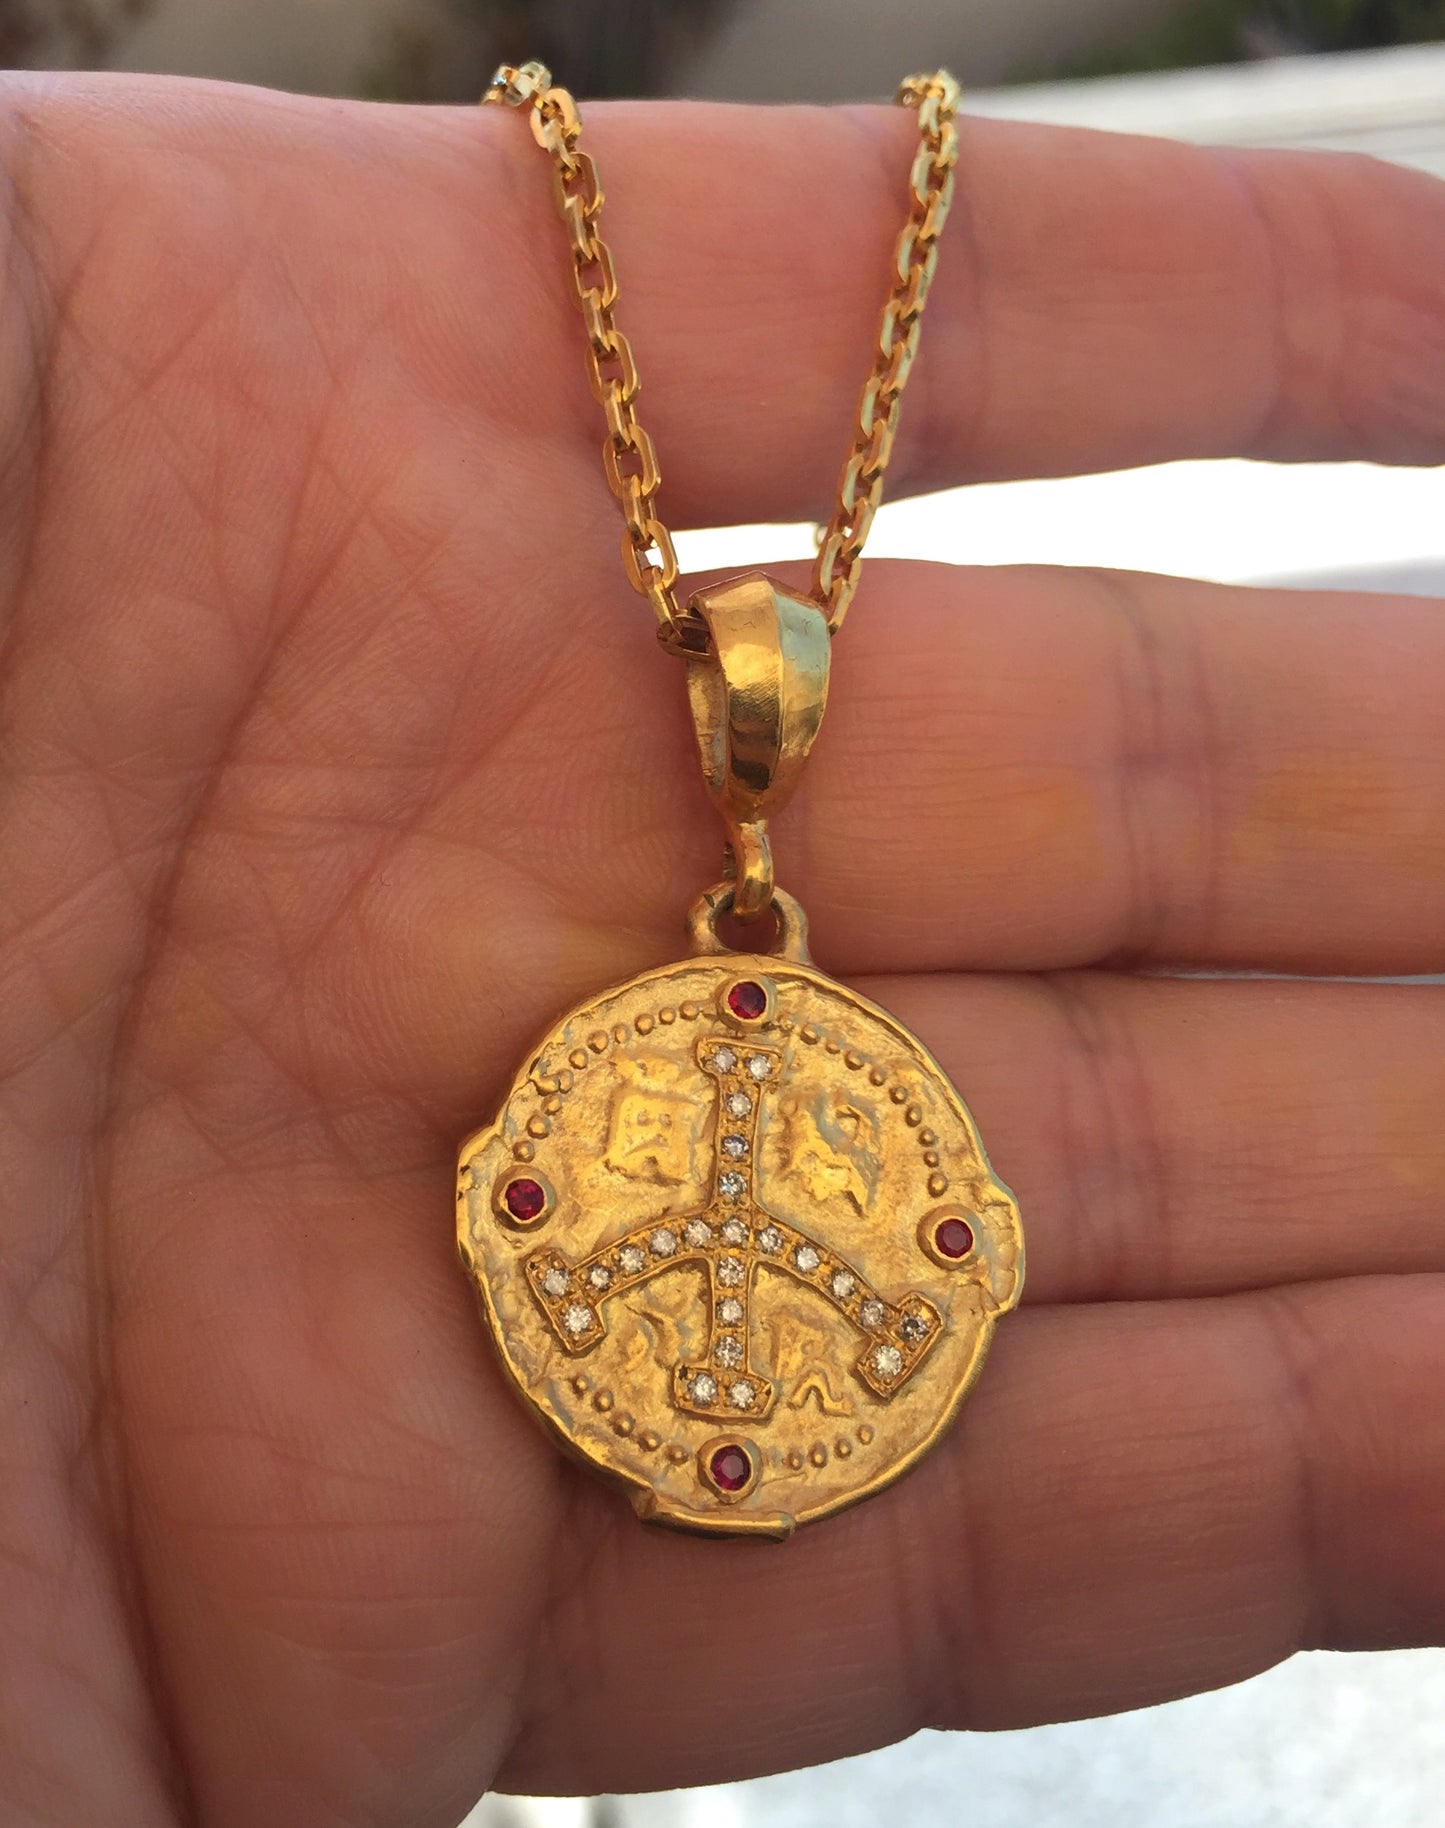 Necklace - Medallion/Ancient Golden Peace Sign with Diamonds